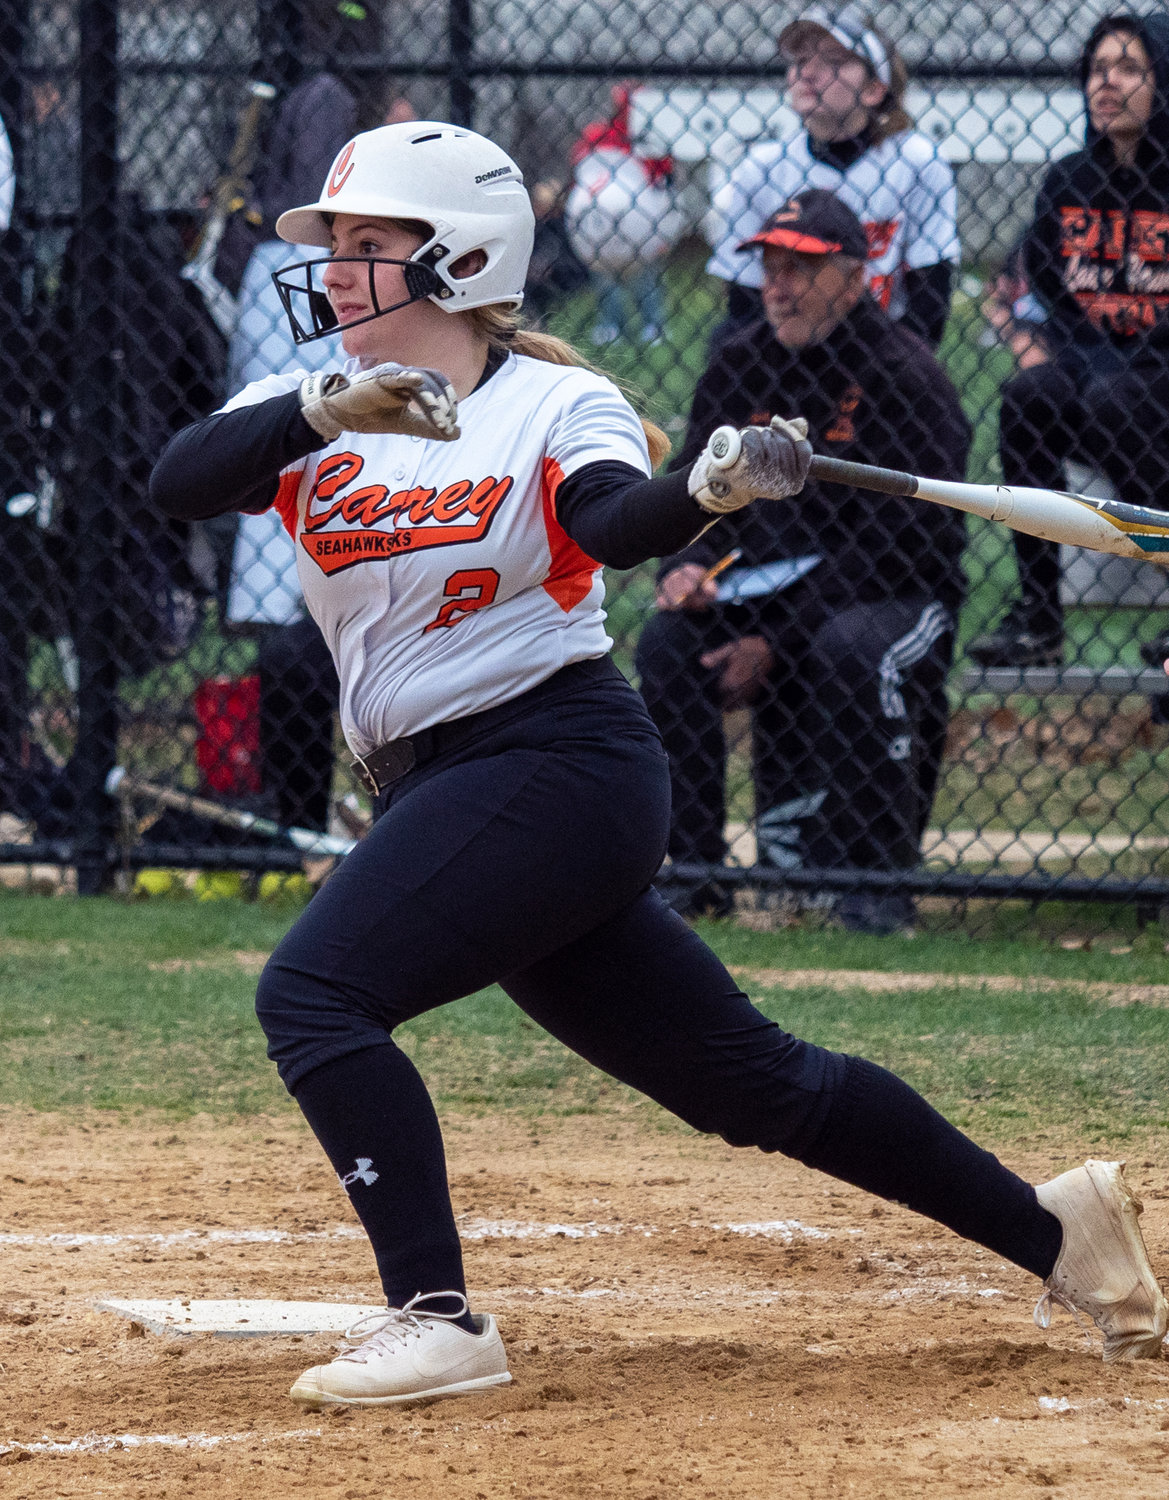 Senior Ava Rigano blasted two homers to help lift the Seahawks over visiting East Meadow, 10-6, on April 5.